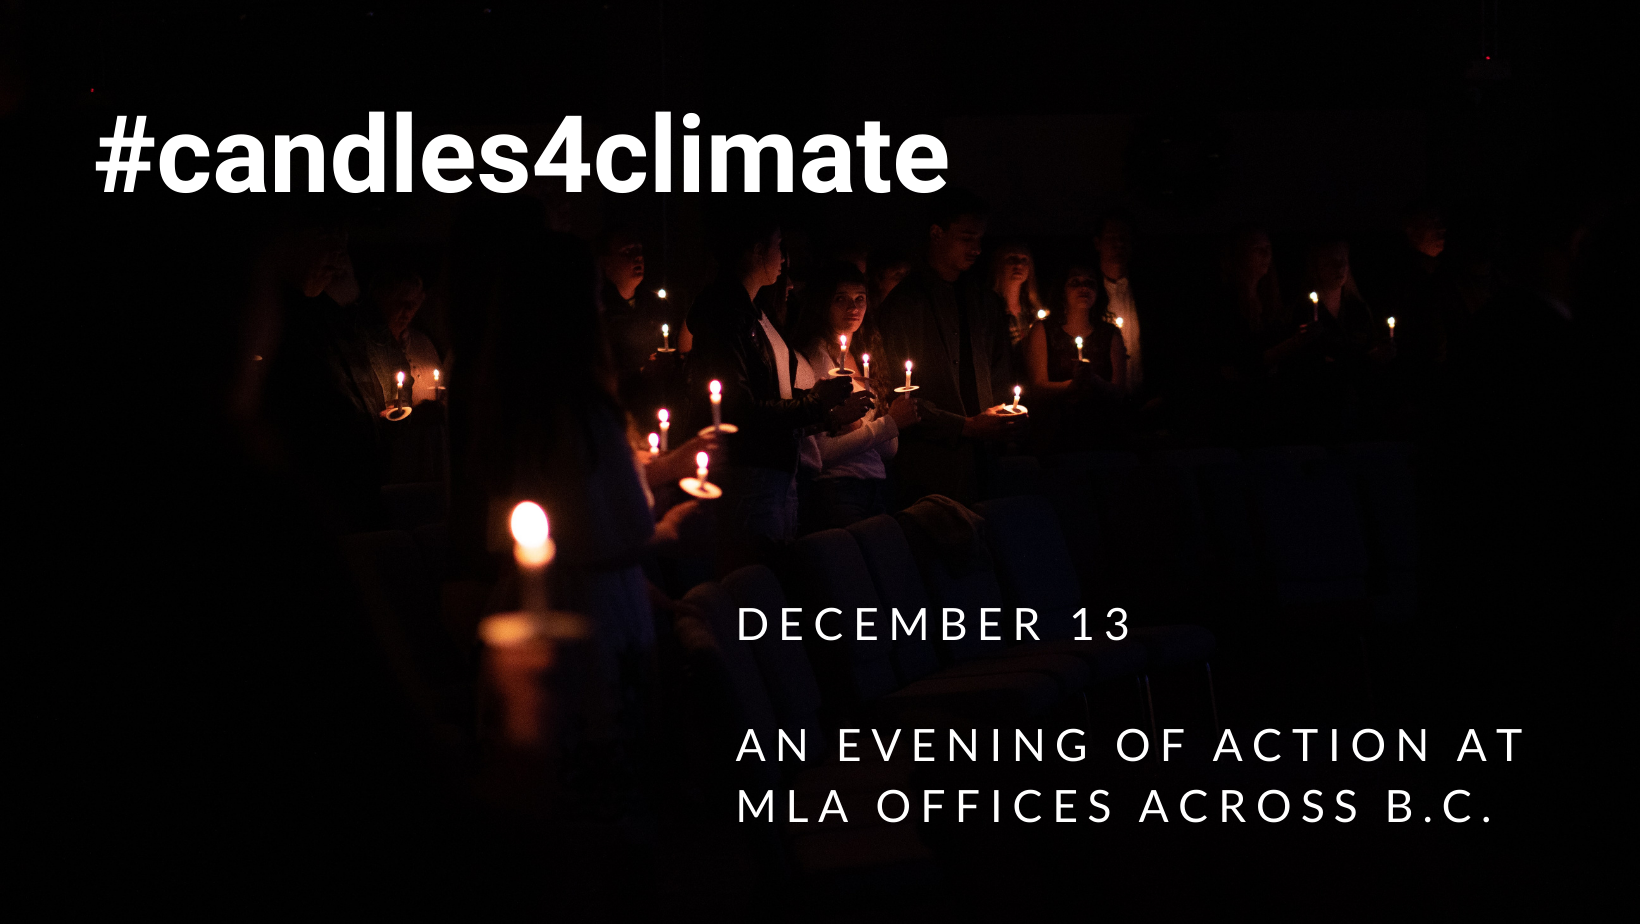 A line of people holding candles in the dark, with "#candles4climate, December 13, an evening of action at MLA offices across BC" on top.